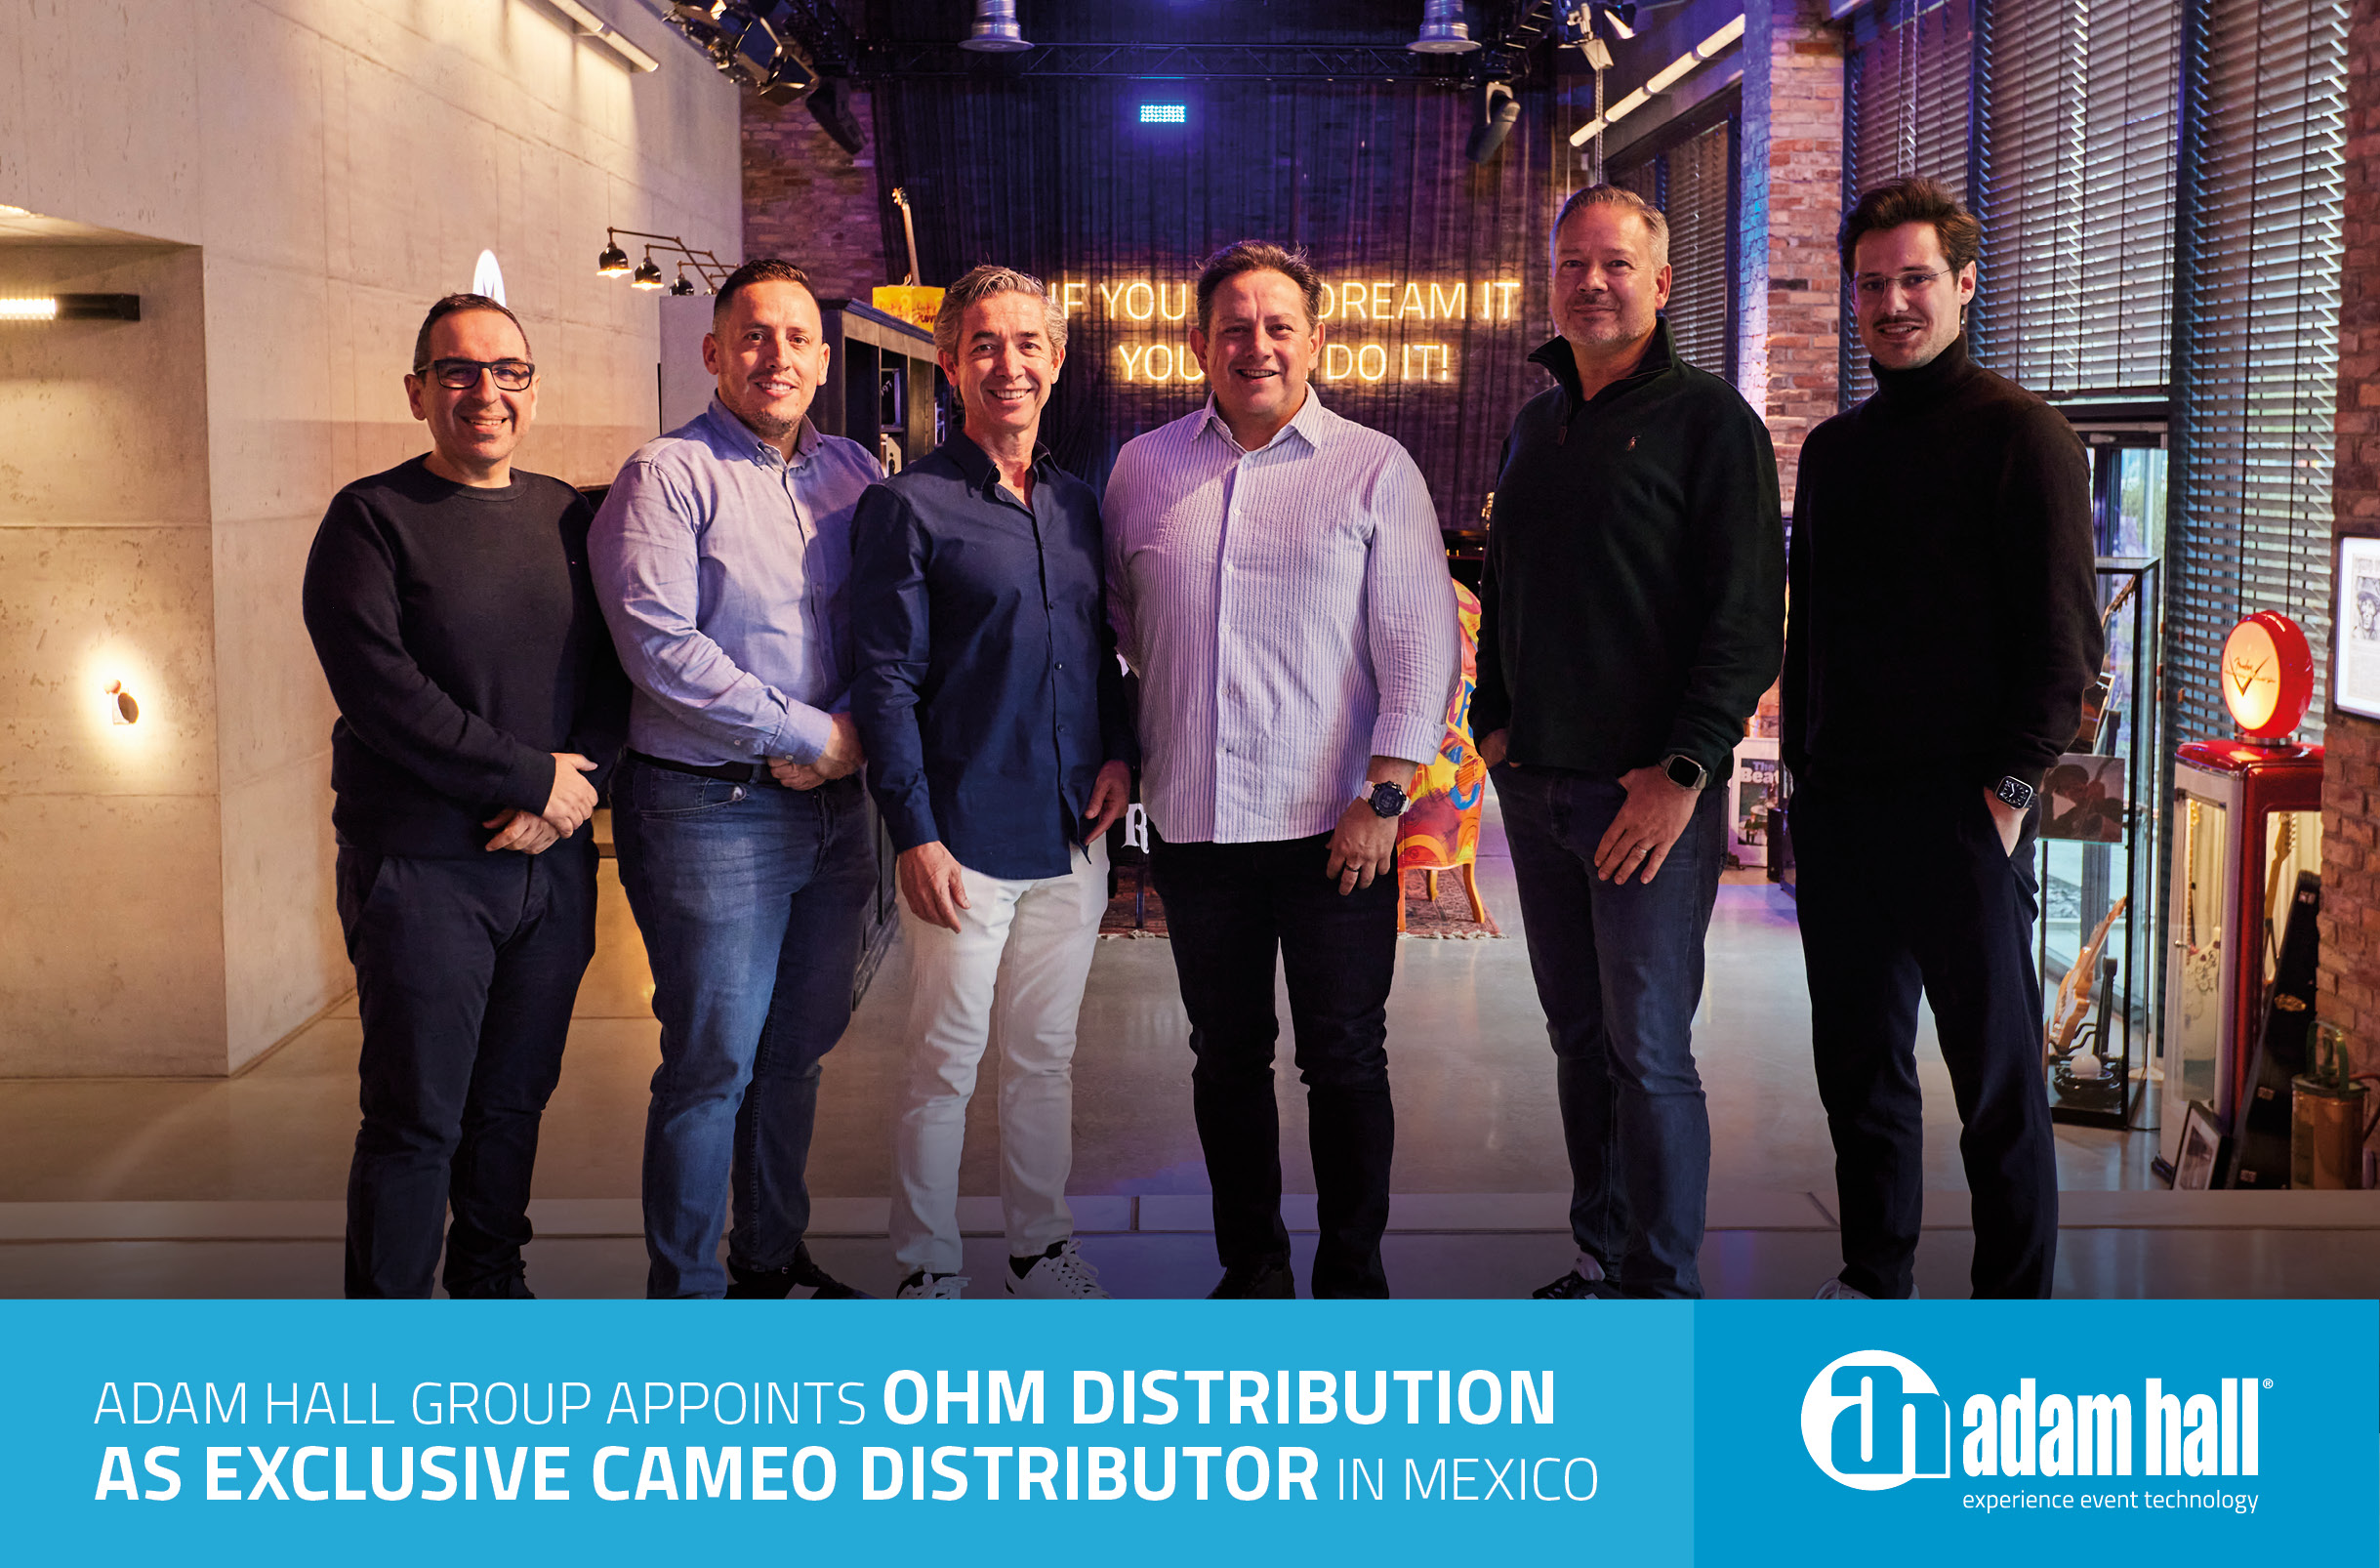 We appoint OHM Distribution as exclusive Cameo distributor in Mexico